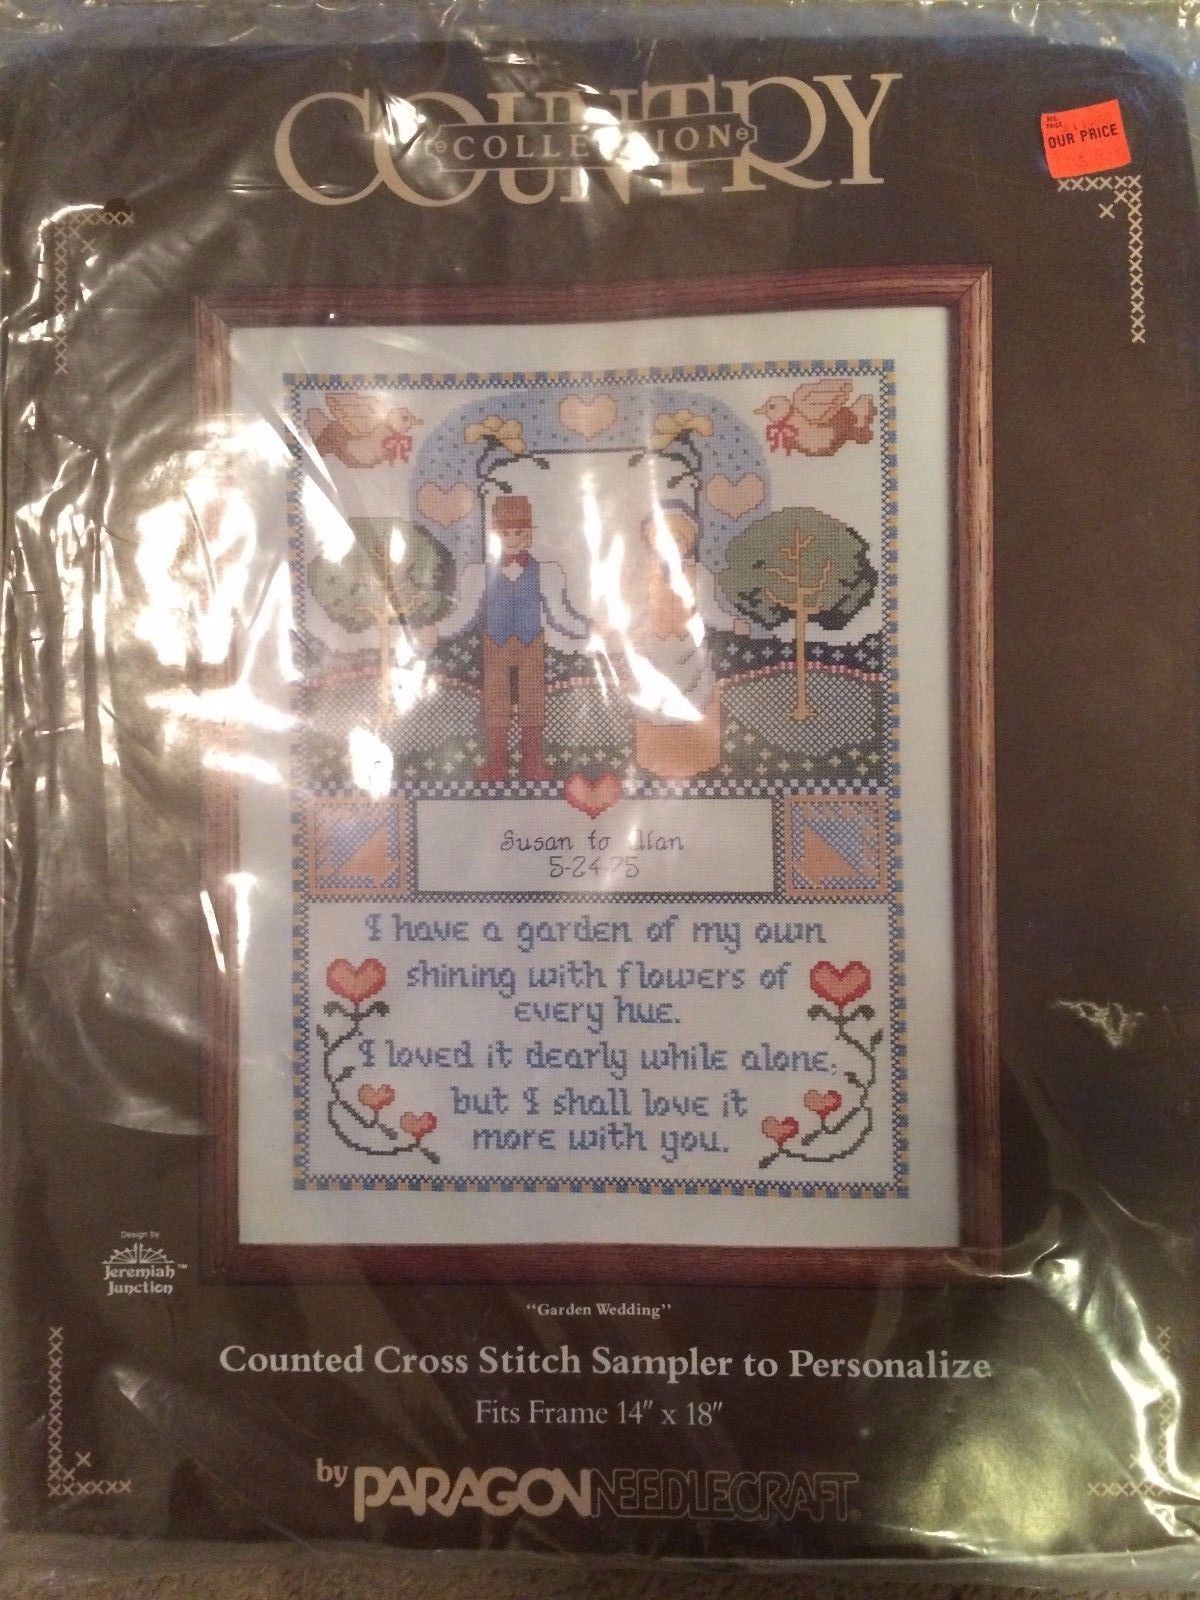 PARAGON Country Collection GARDEN WEDDING Counted Cross Stitch Sampler Kit 2055 - $15.00